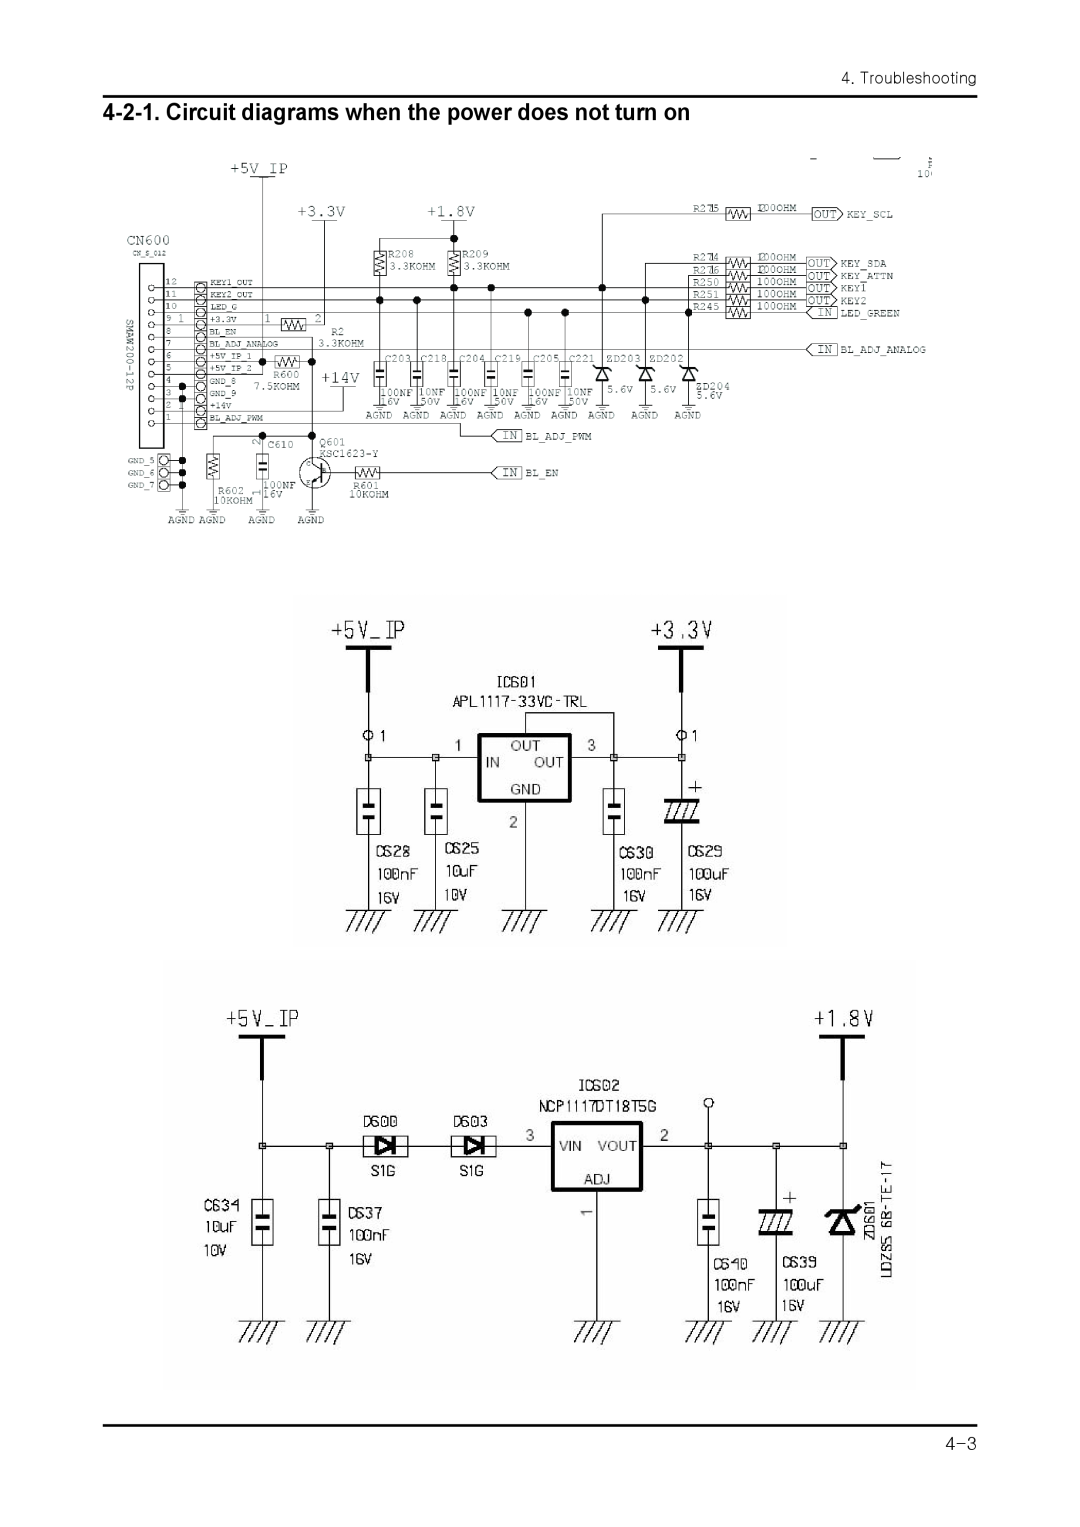 Samsung 943NWX service manual Circuit diagrams when the power does not turn on, Troubleshooting 